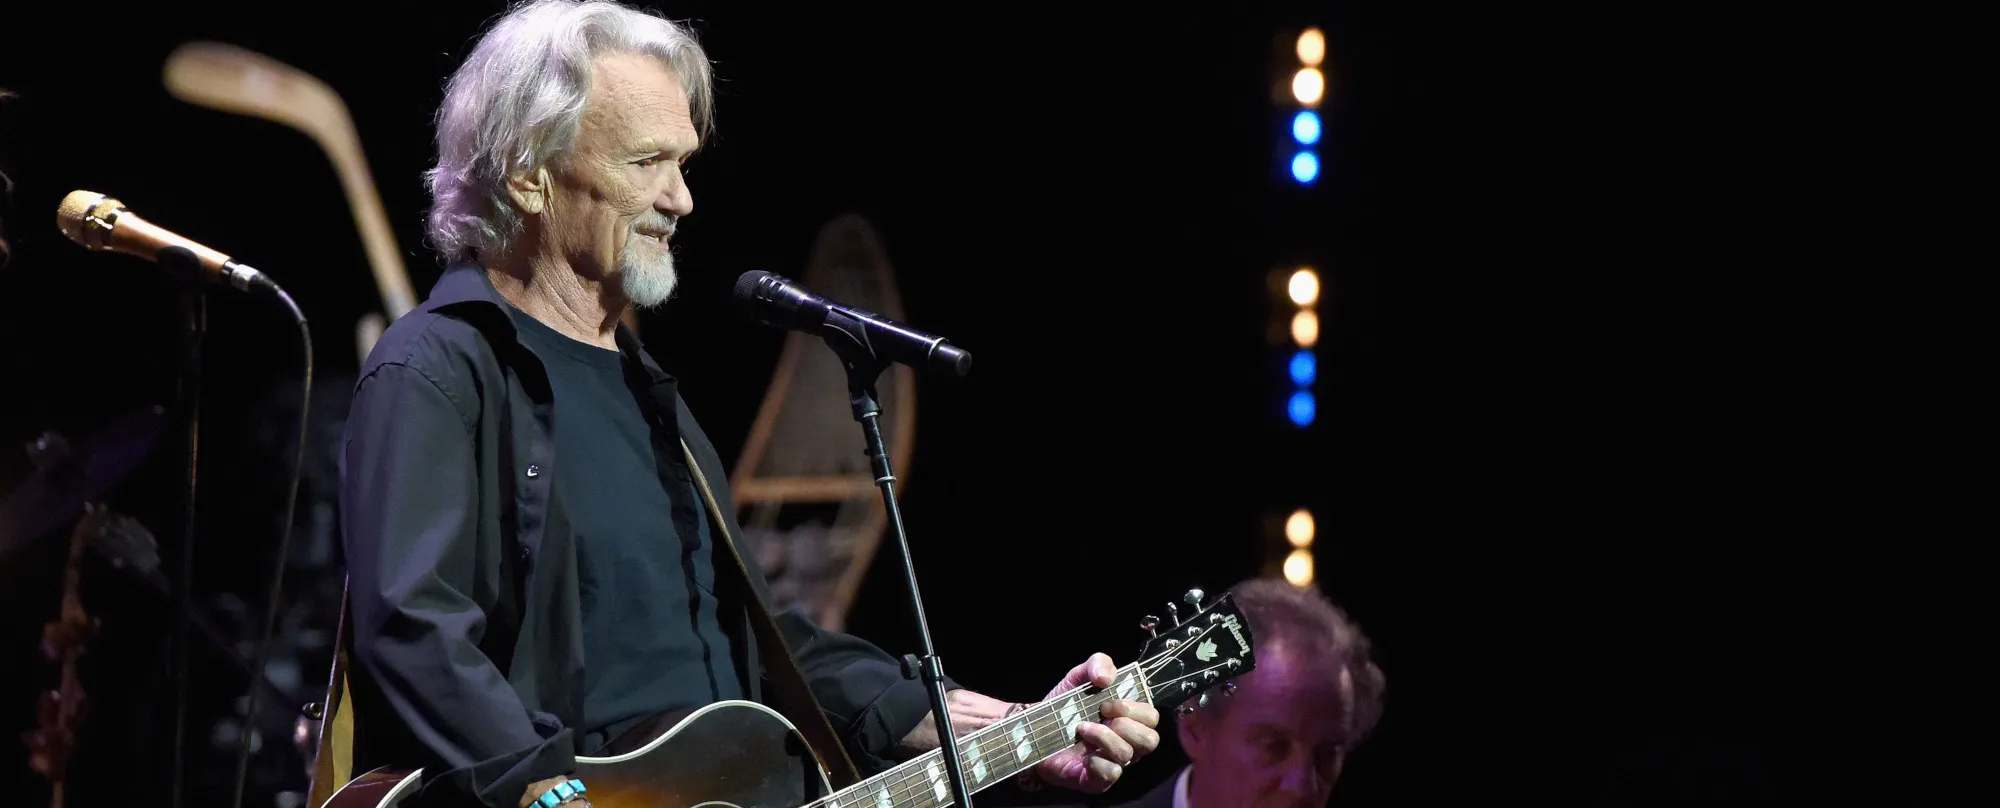 4 Songs You Didn’t Know Kris Kristofferson Wrote for Other Artists